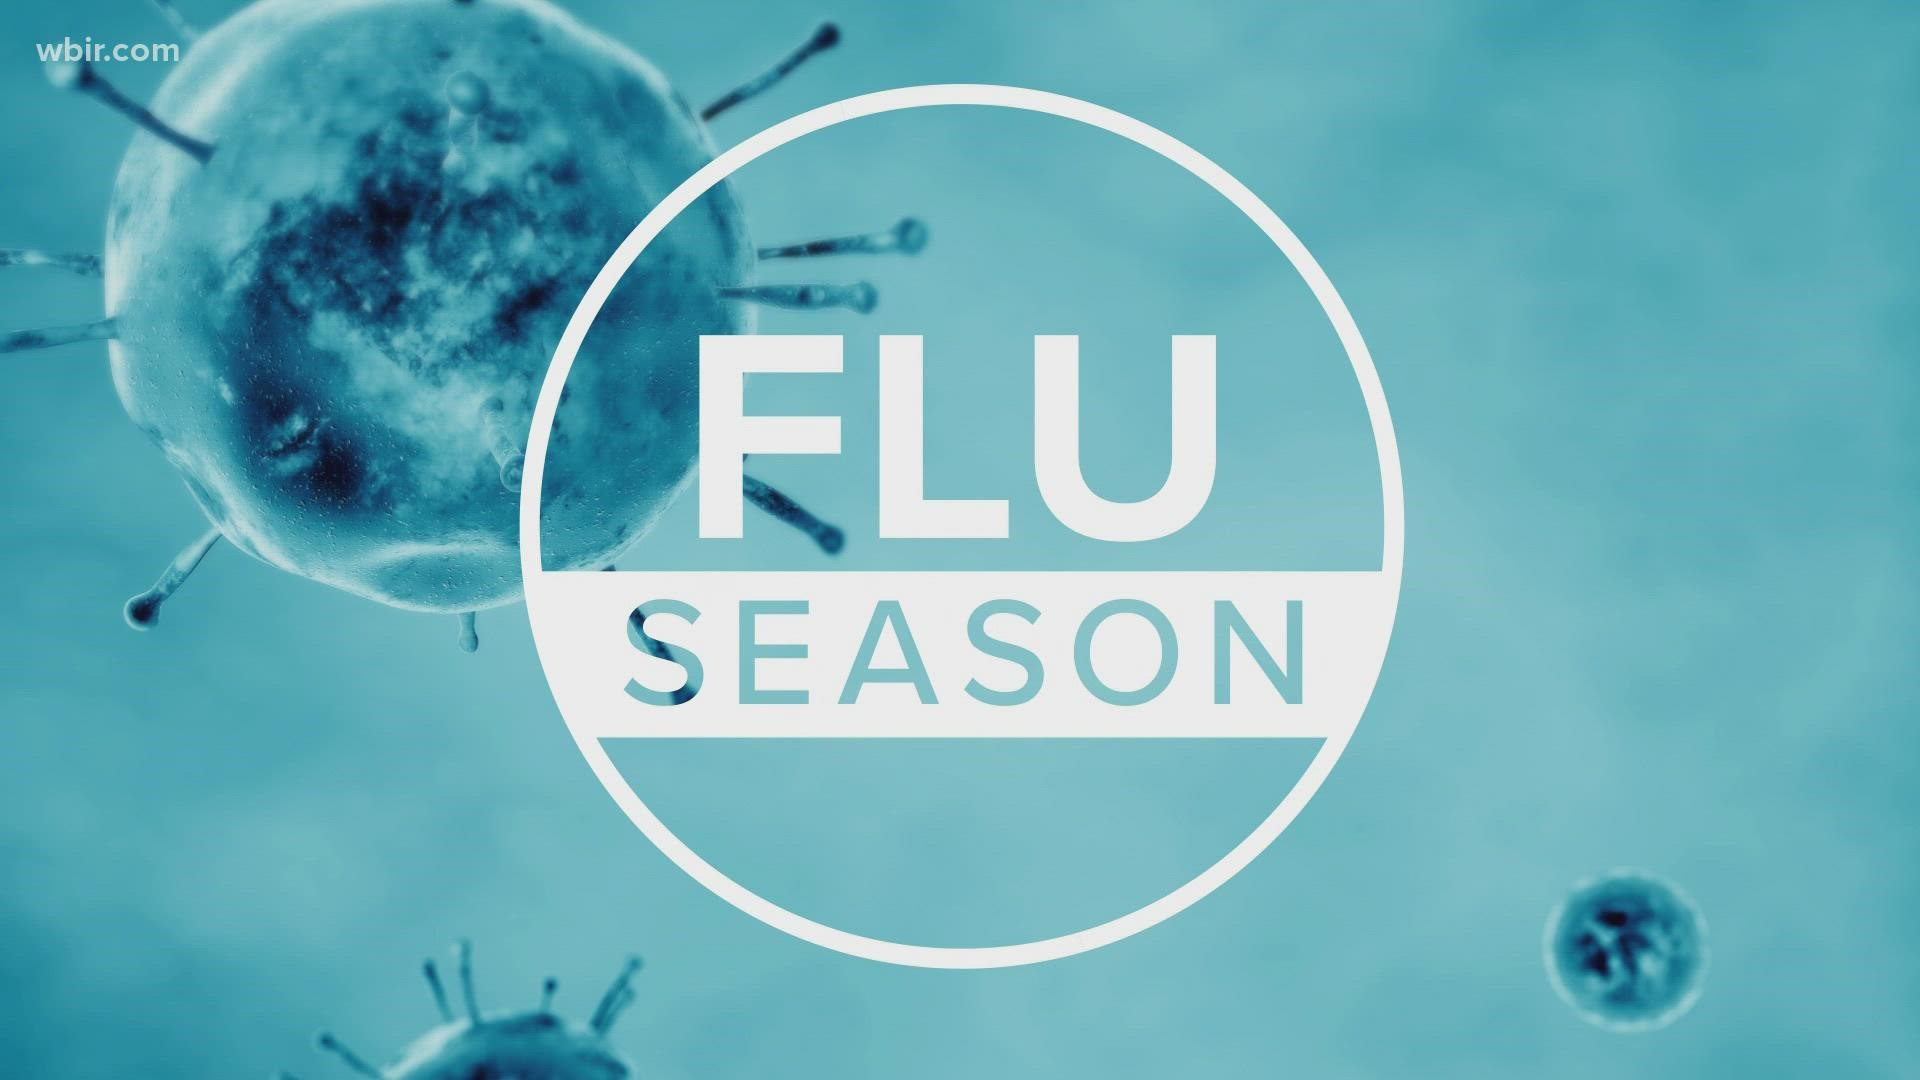 According to the CDC, on average, flu cases rise between the months of December and February. This year, flu season arrived a little bit earlier.